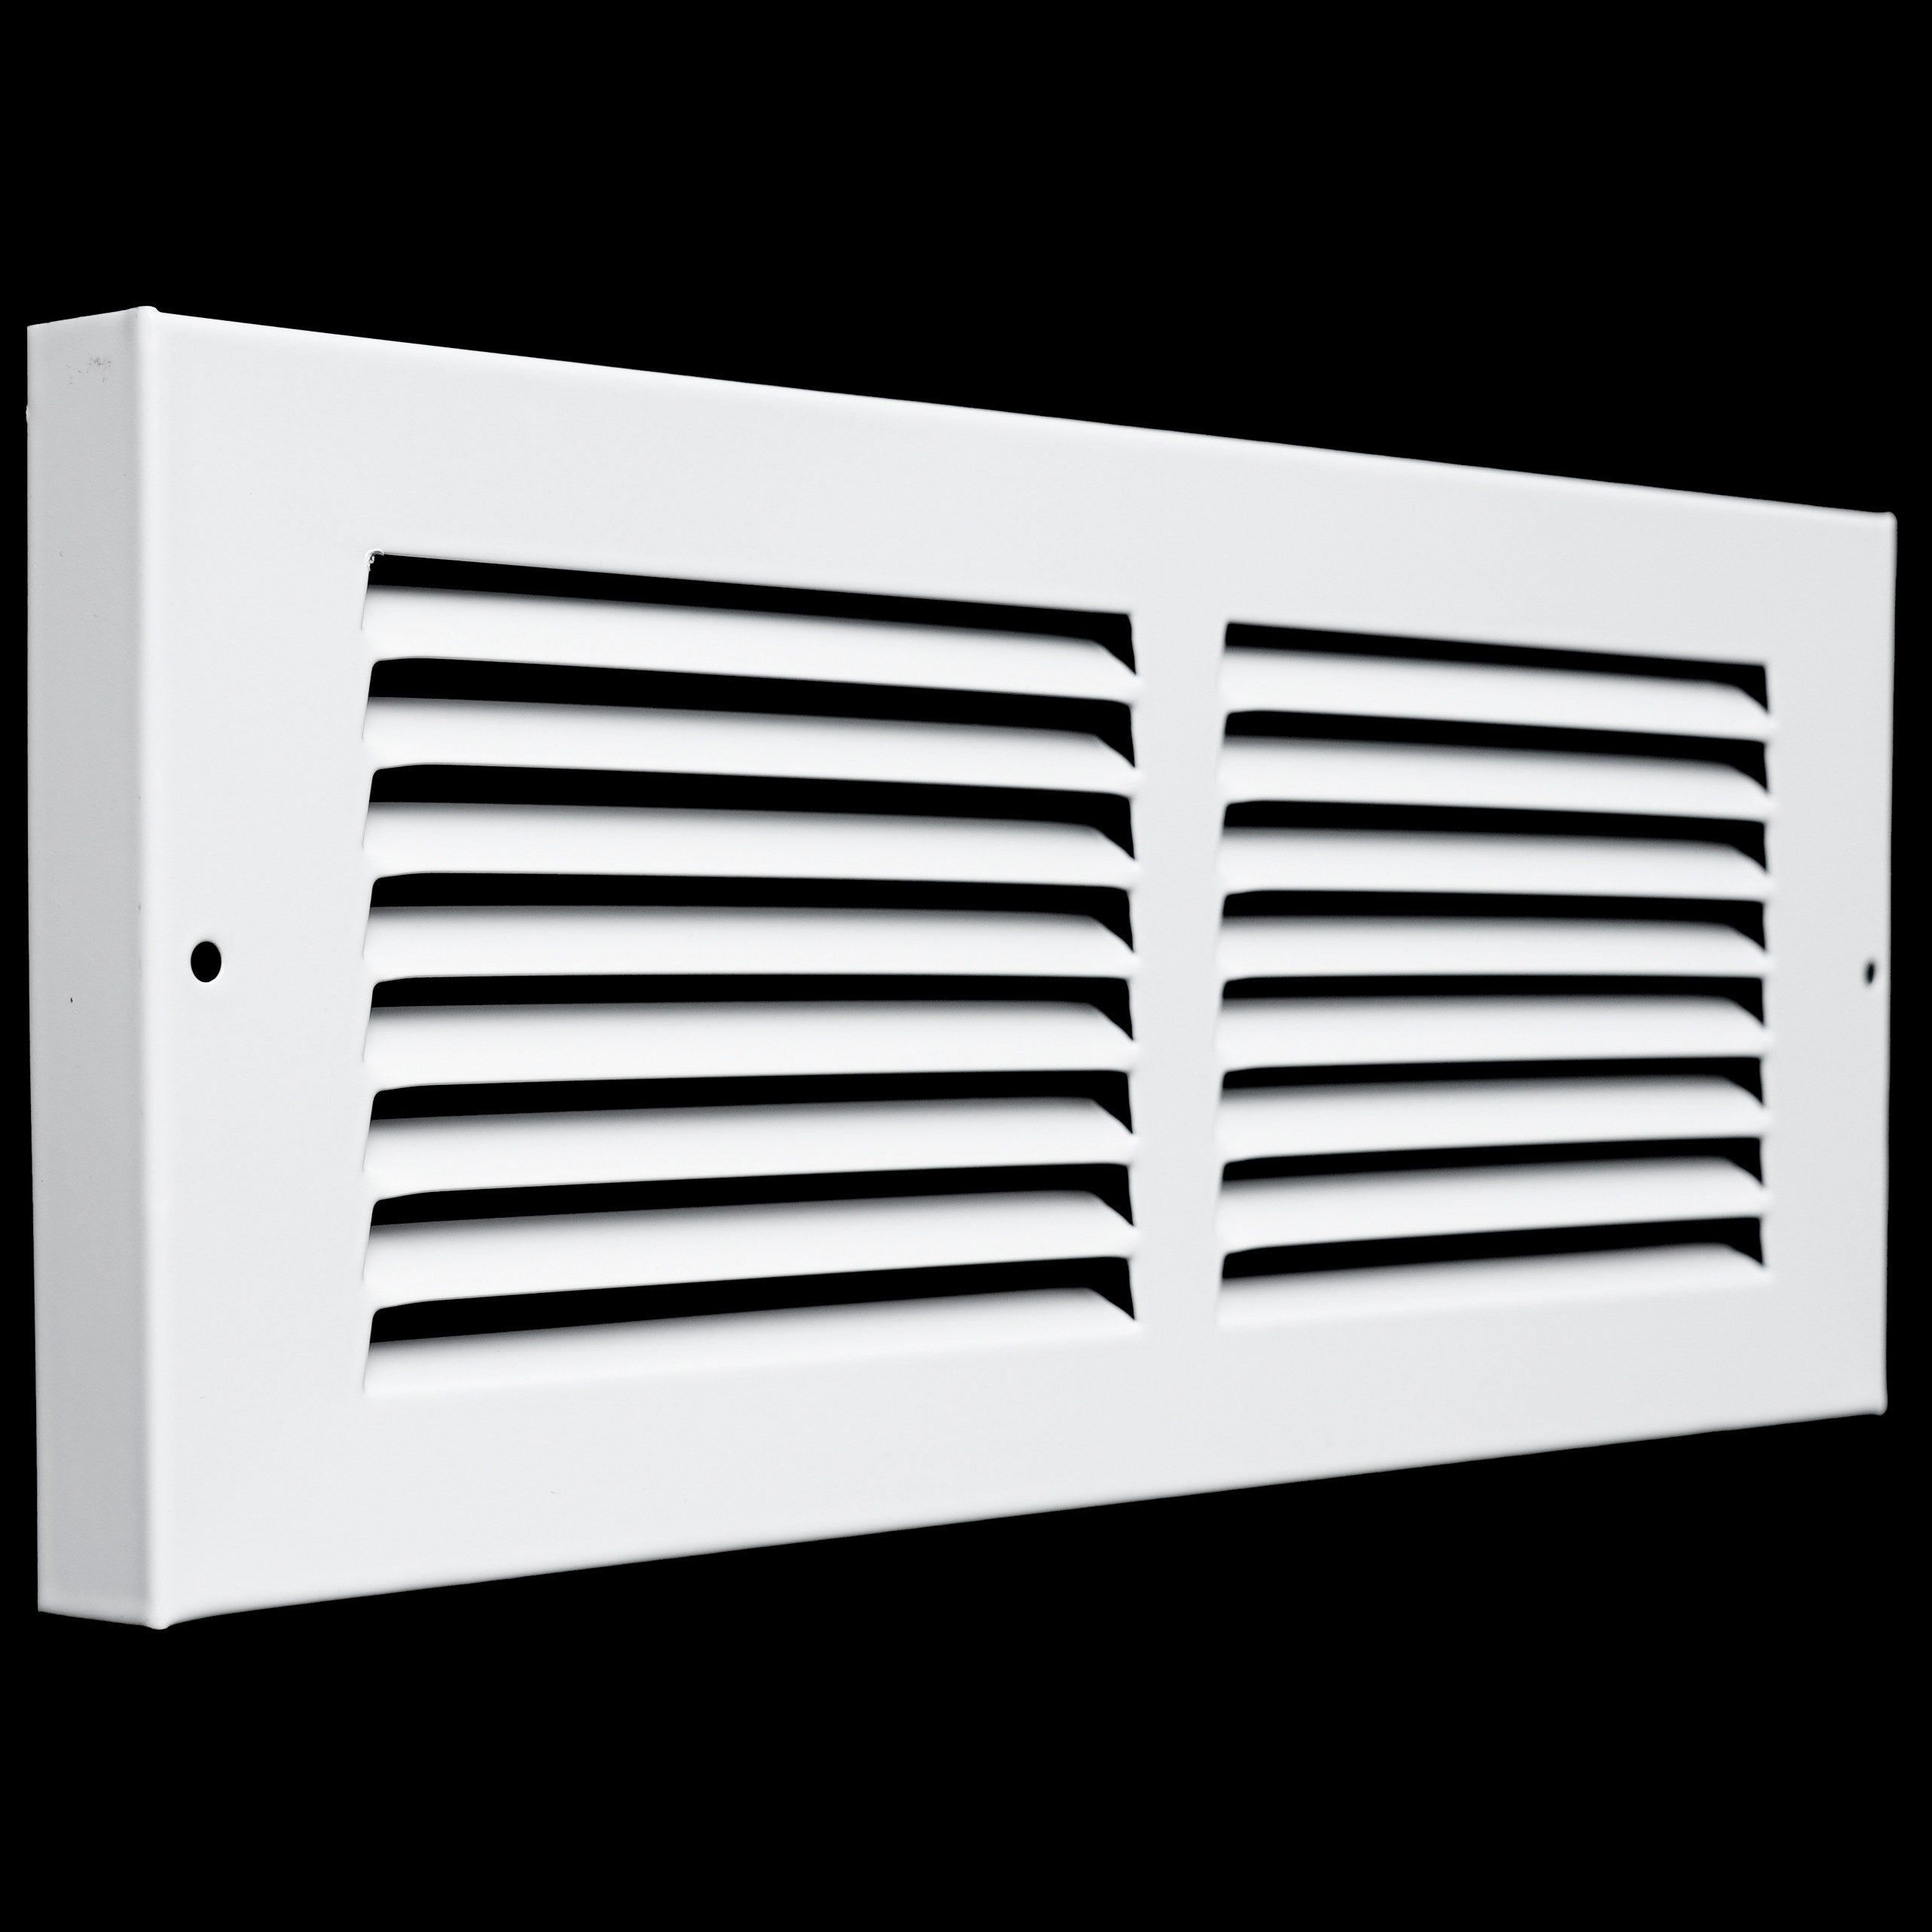 airgrilles 12"w x 4"h baseboard return air grille  -  vent cover grill  -  7/8" margin turnback to fit baseboard  -  white  -  outer dimensions: 13.75"w x 5.75"h for 12x4 duct opening hnd-bra-wh-12x4  - 1